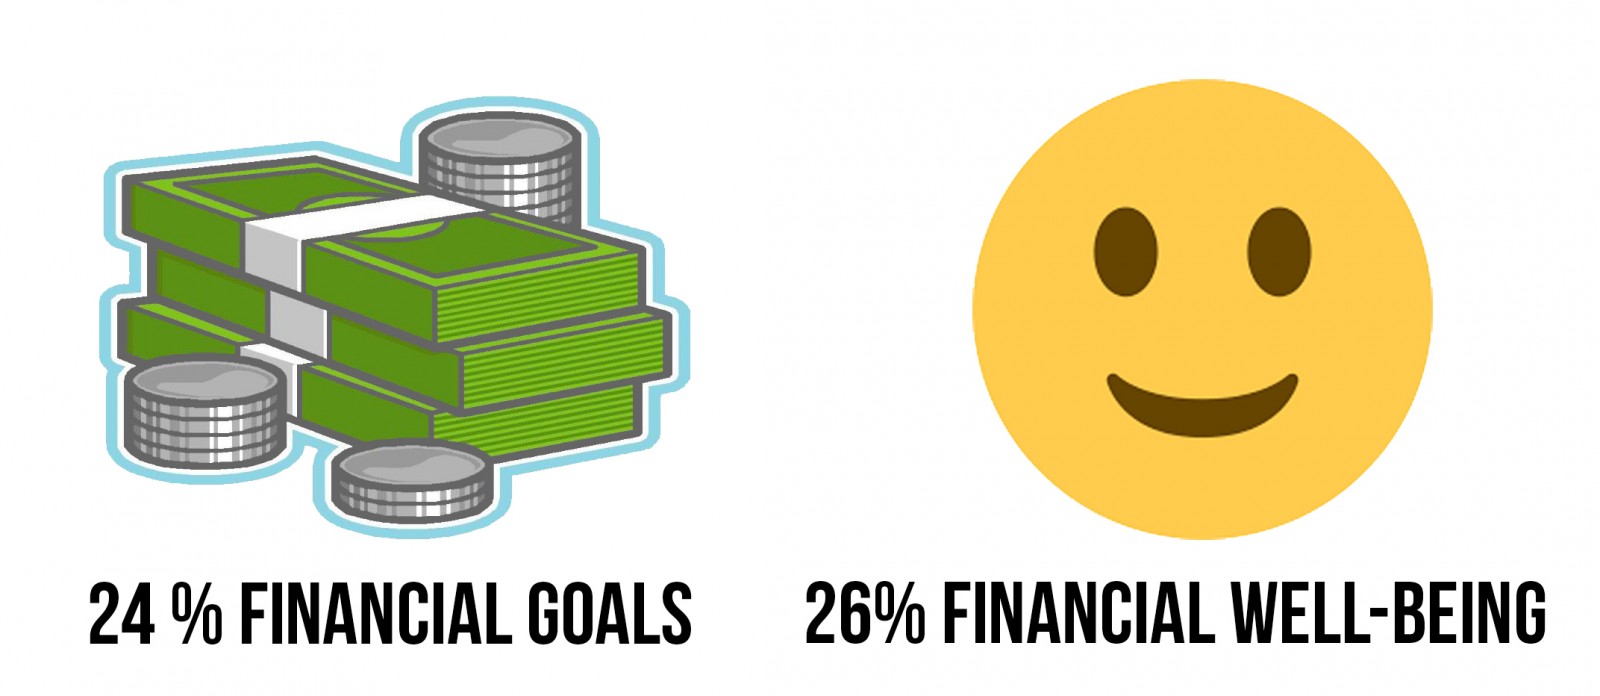 Financial Goals and Well-Being